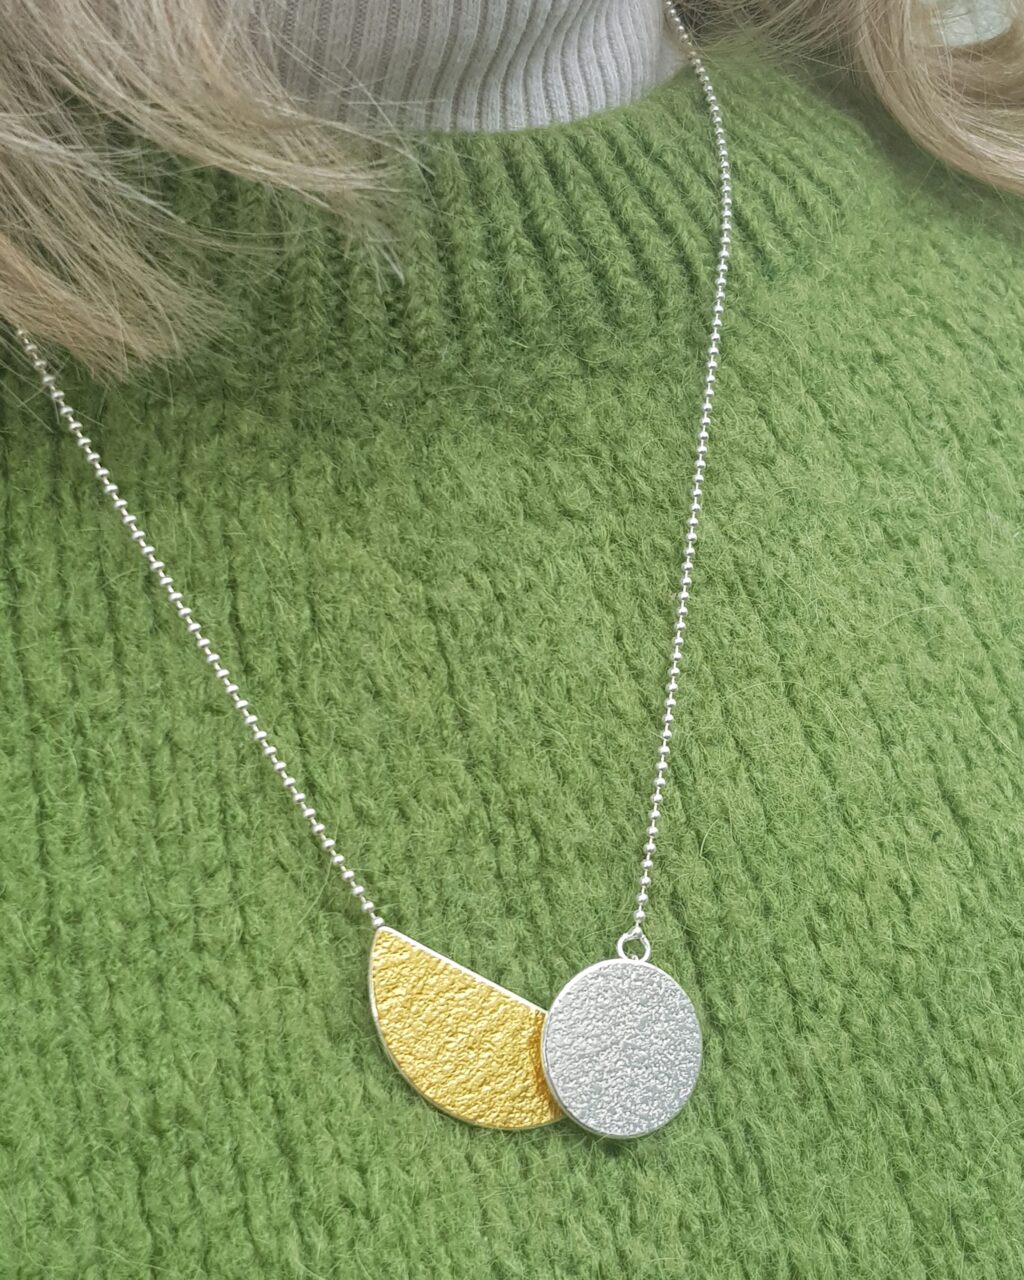 gold and silver geometric necklace - DeeLyn